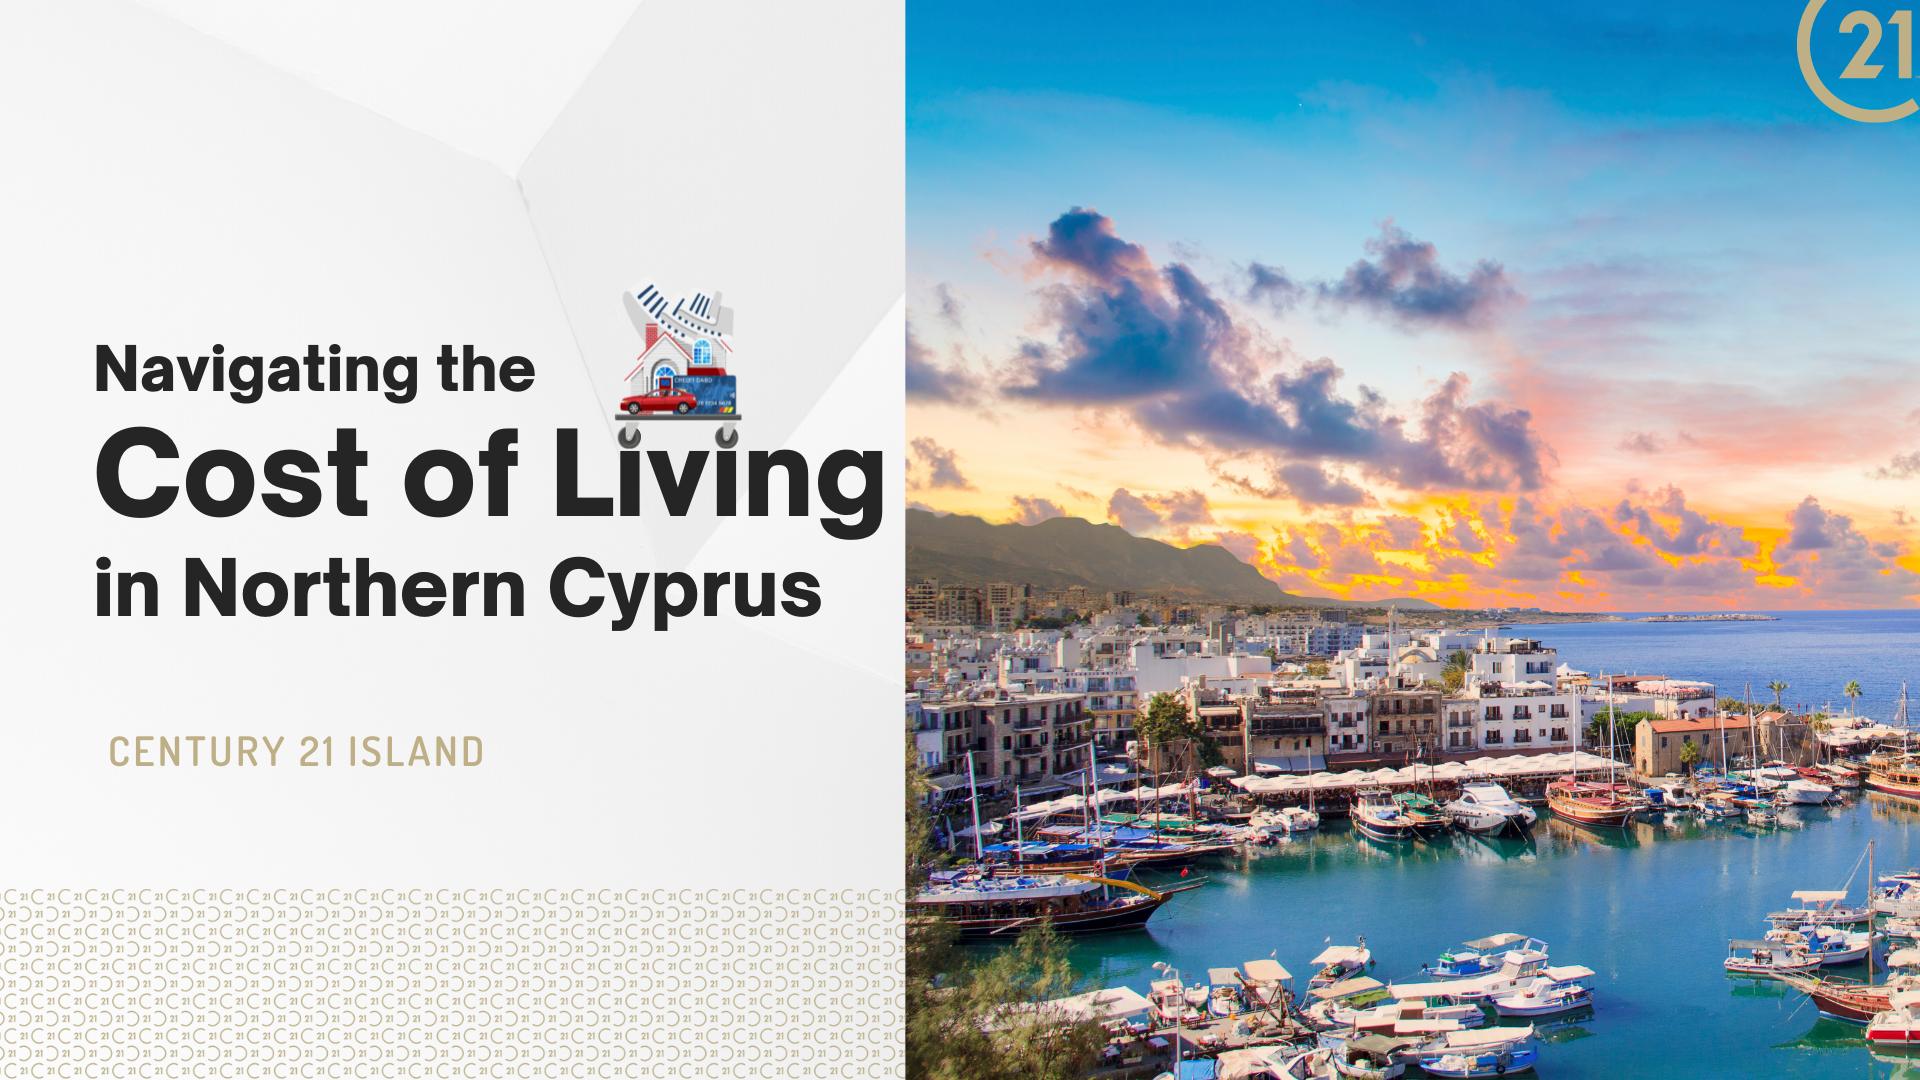 Navigating the Cost of Living in Northern Cyprus